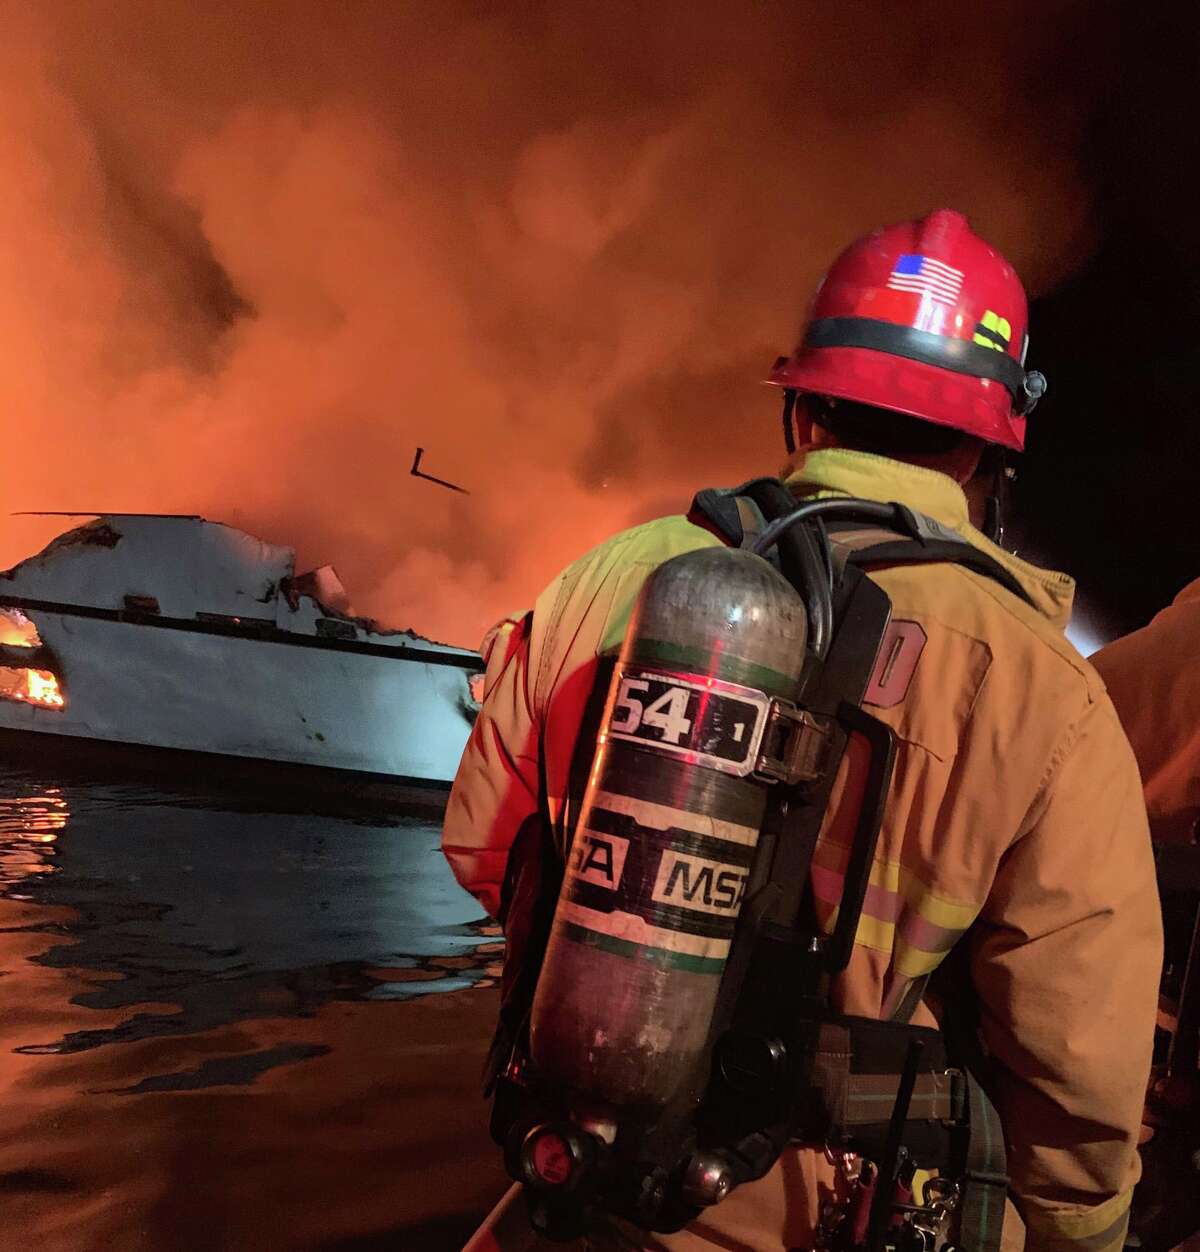 Dozens are missing after a fire on the Truth Aquatics dive boat, "Conception" near Santa Cruz island in Southern California's Channel Islands on Monday, Sept. 2, 2019.